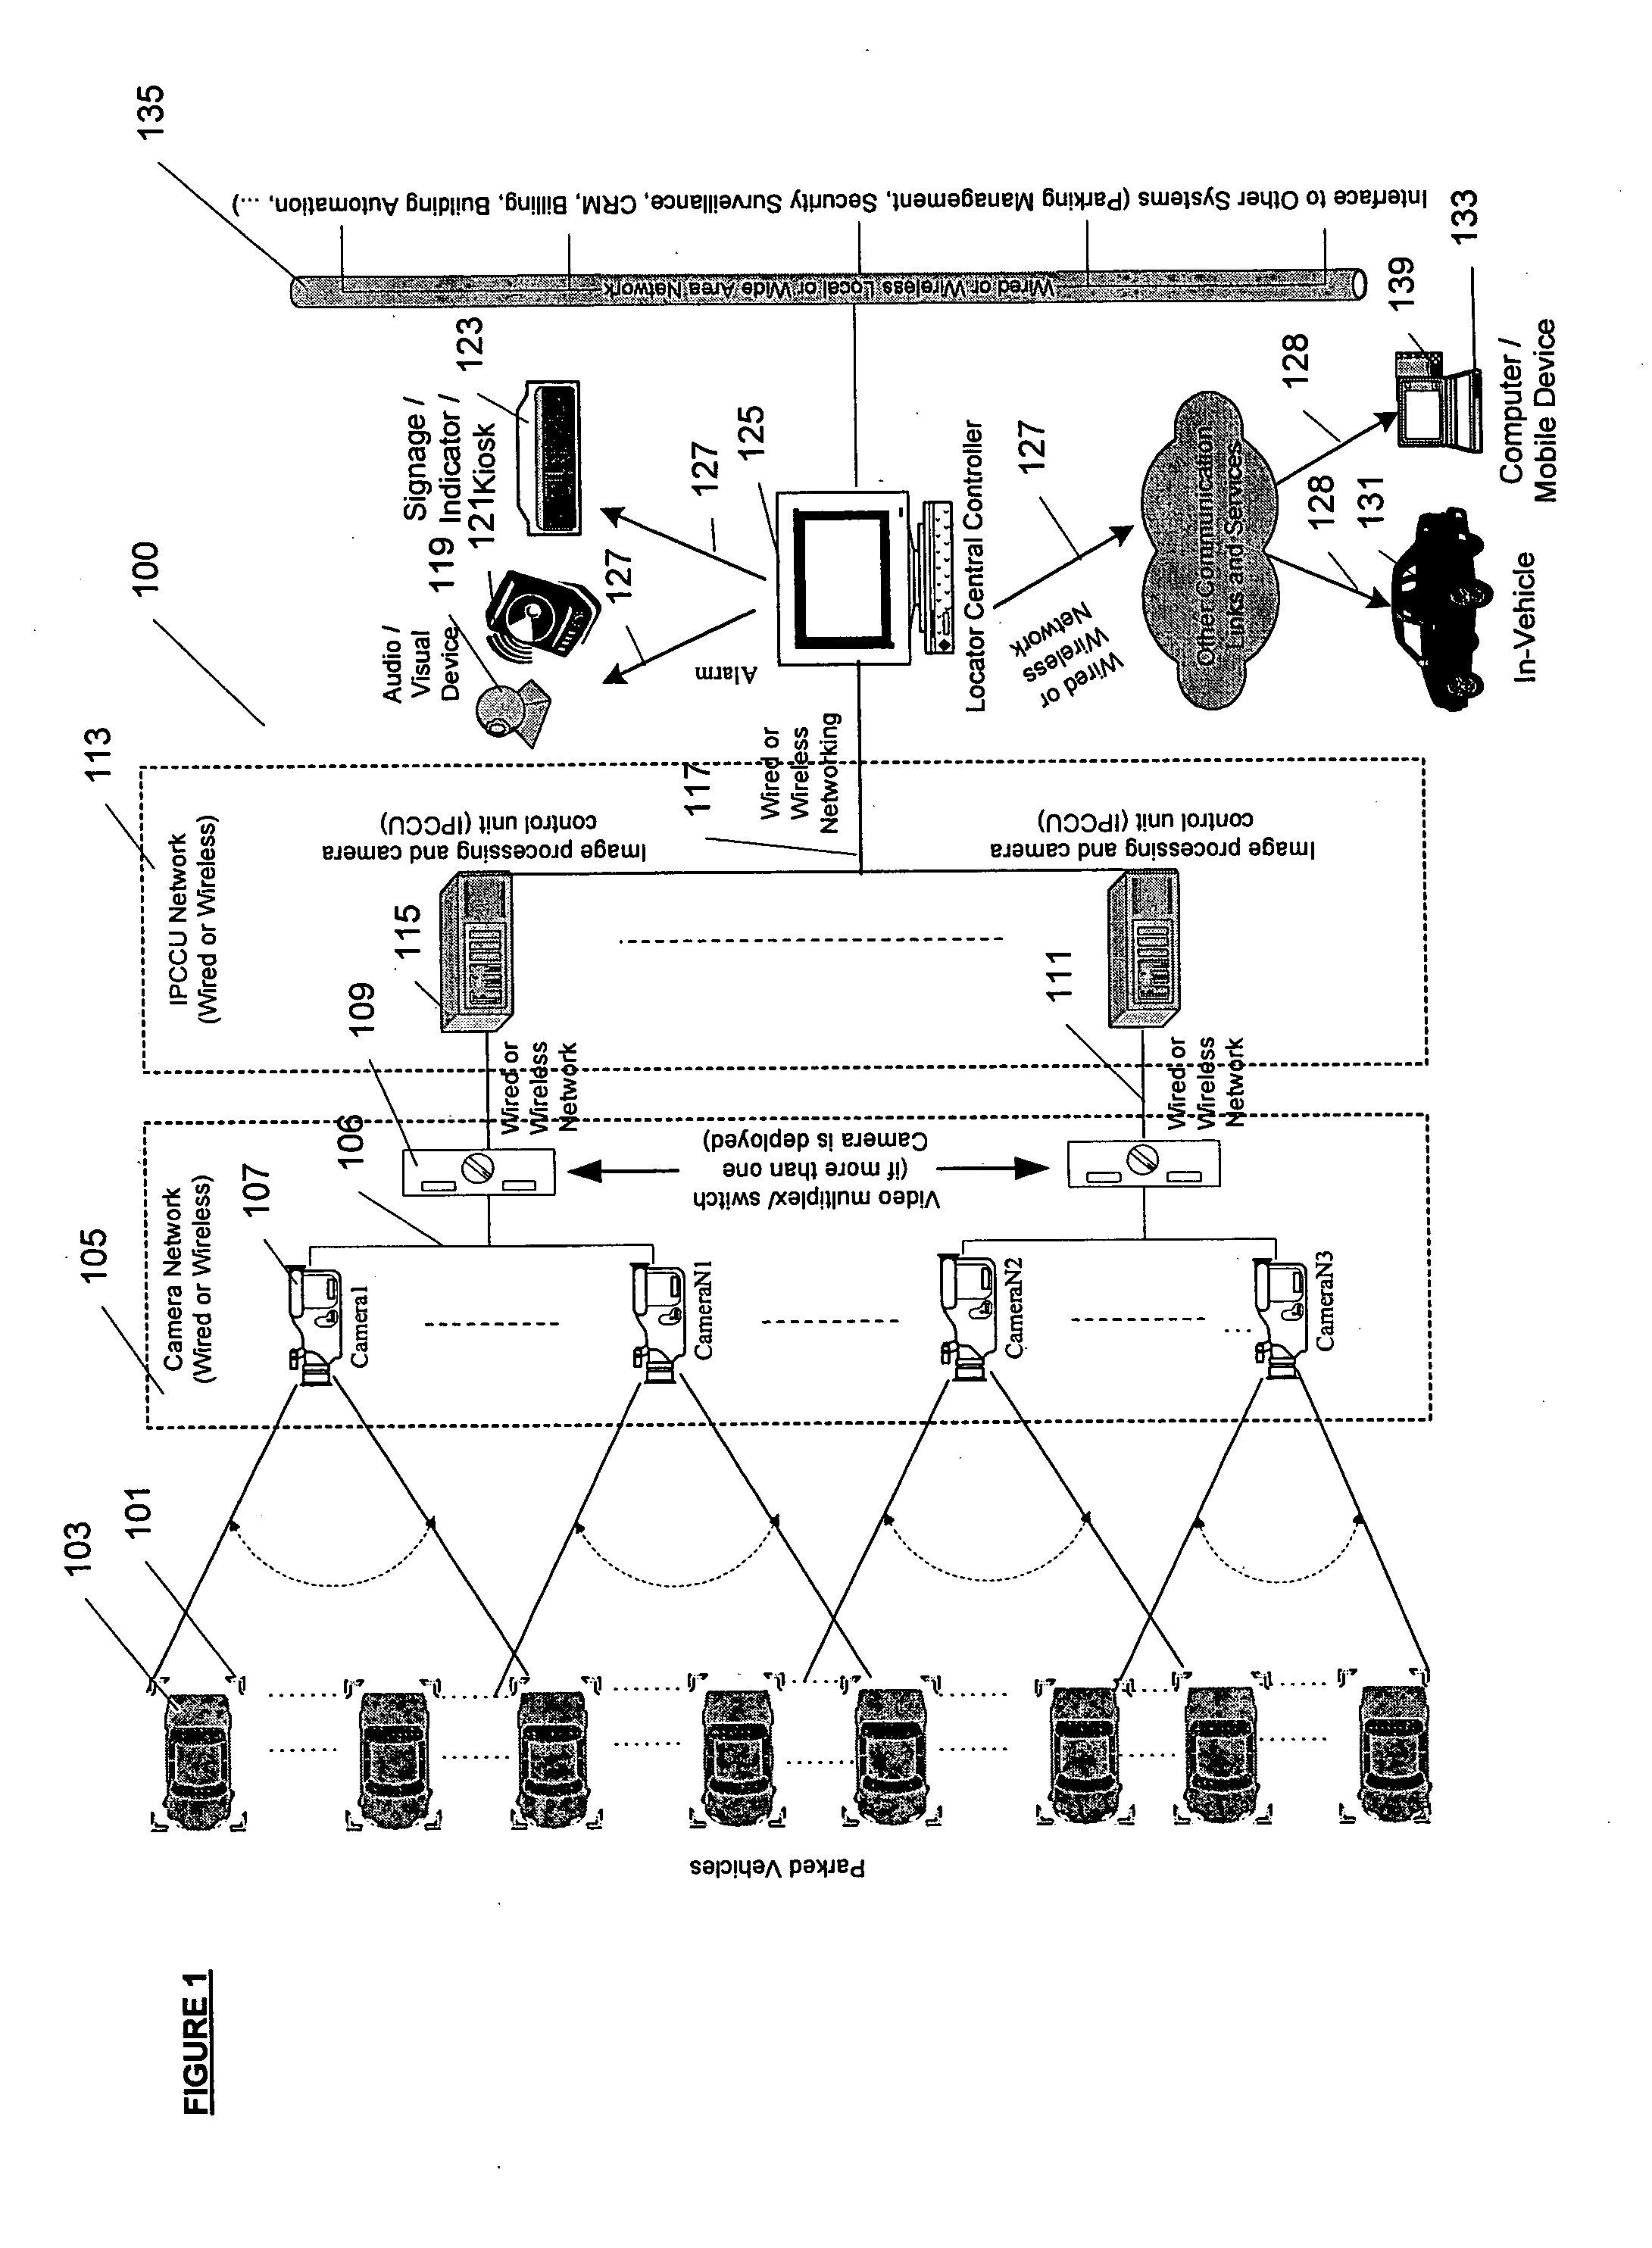 Apparatus and method for locating, identifying and tracking vehicles in a parking area